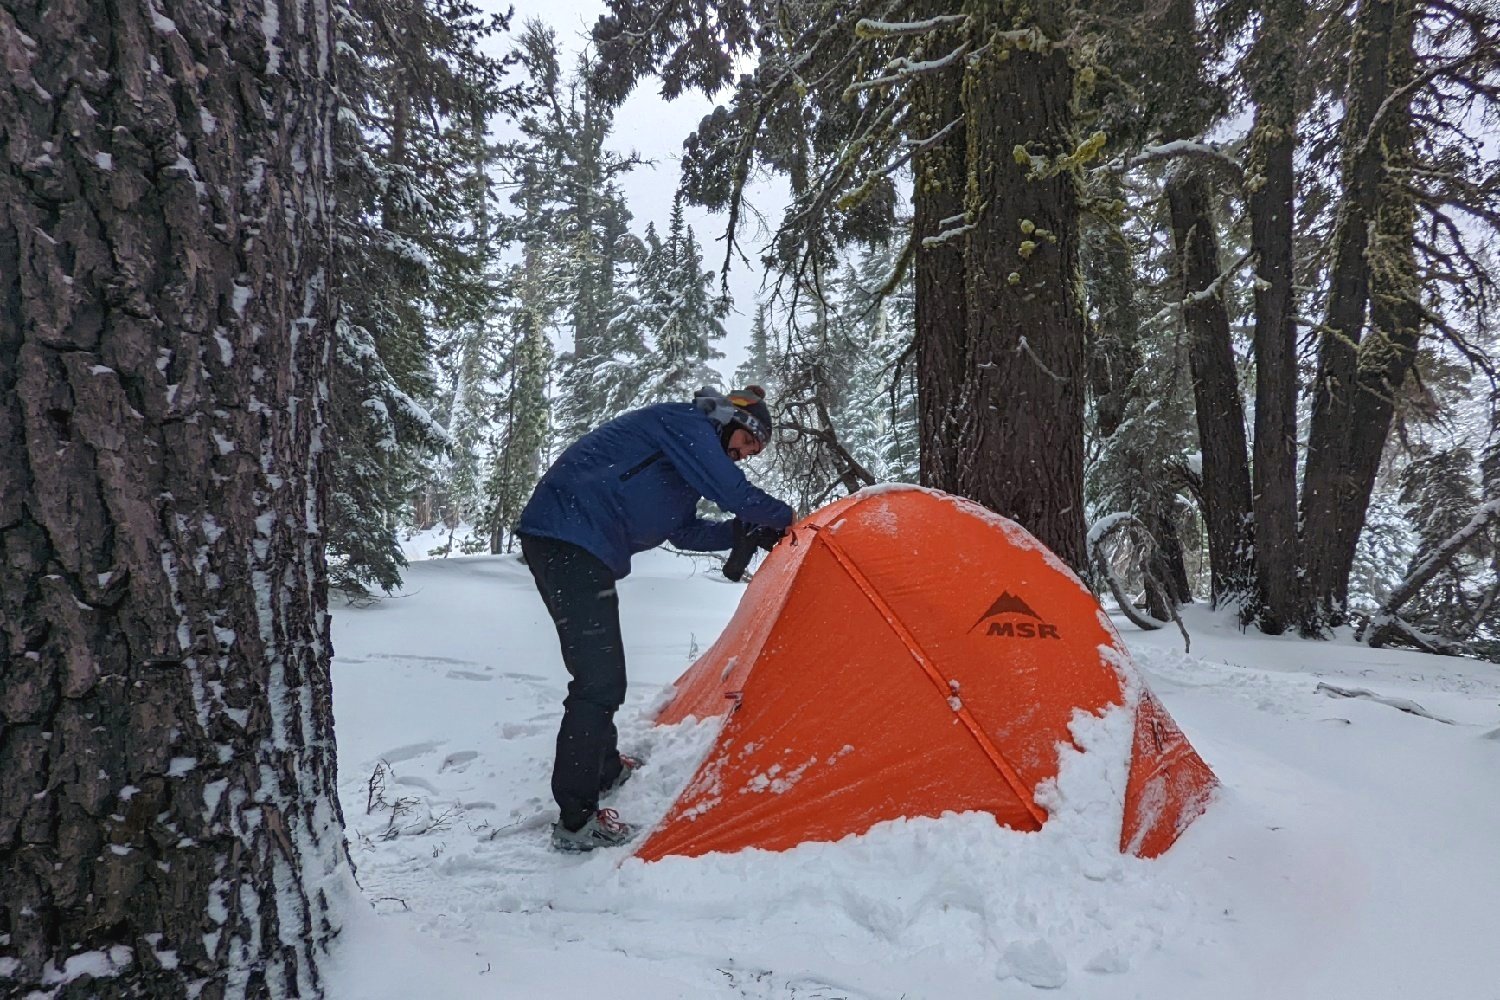 A hiker wear an Enlightened Equipment Visp rain jacket adjusting the rainfly on a tent in the snow